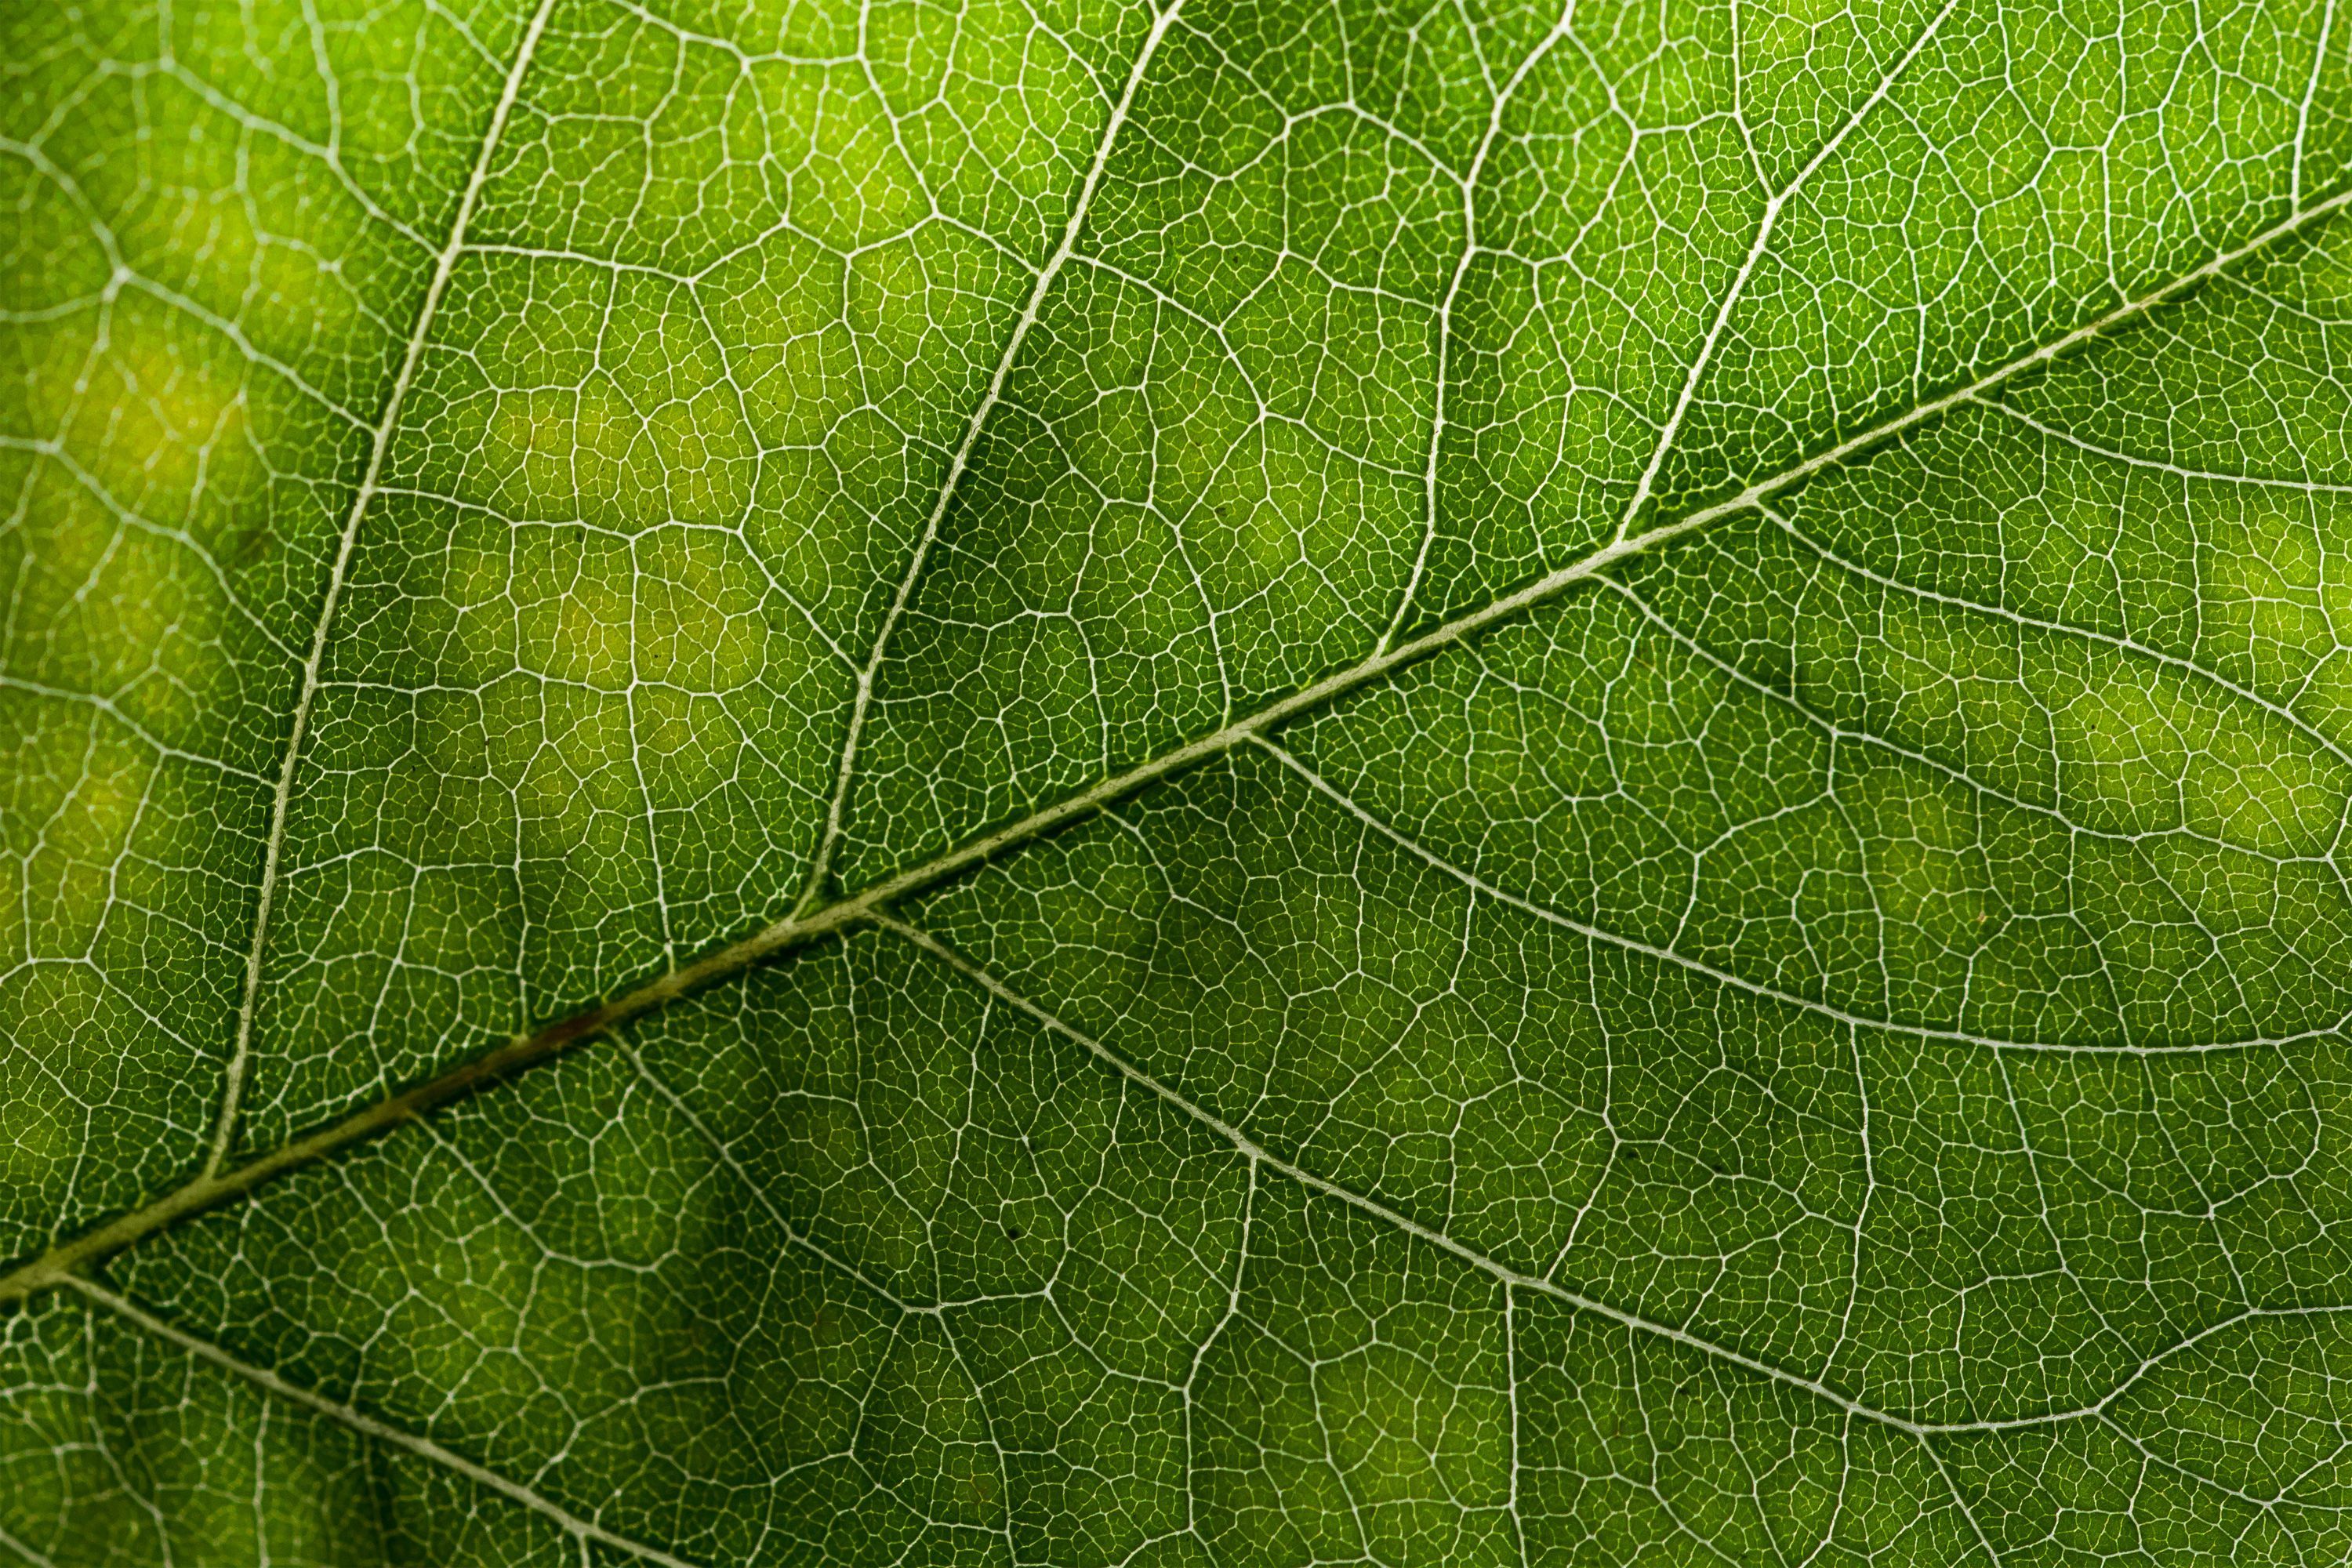 Leaf Textures Wallpapers - Wallpaper Cave